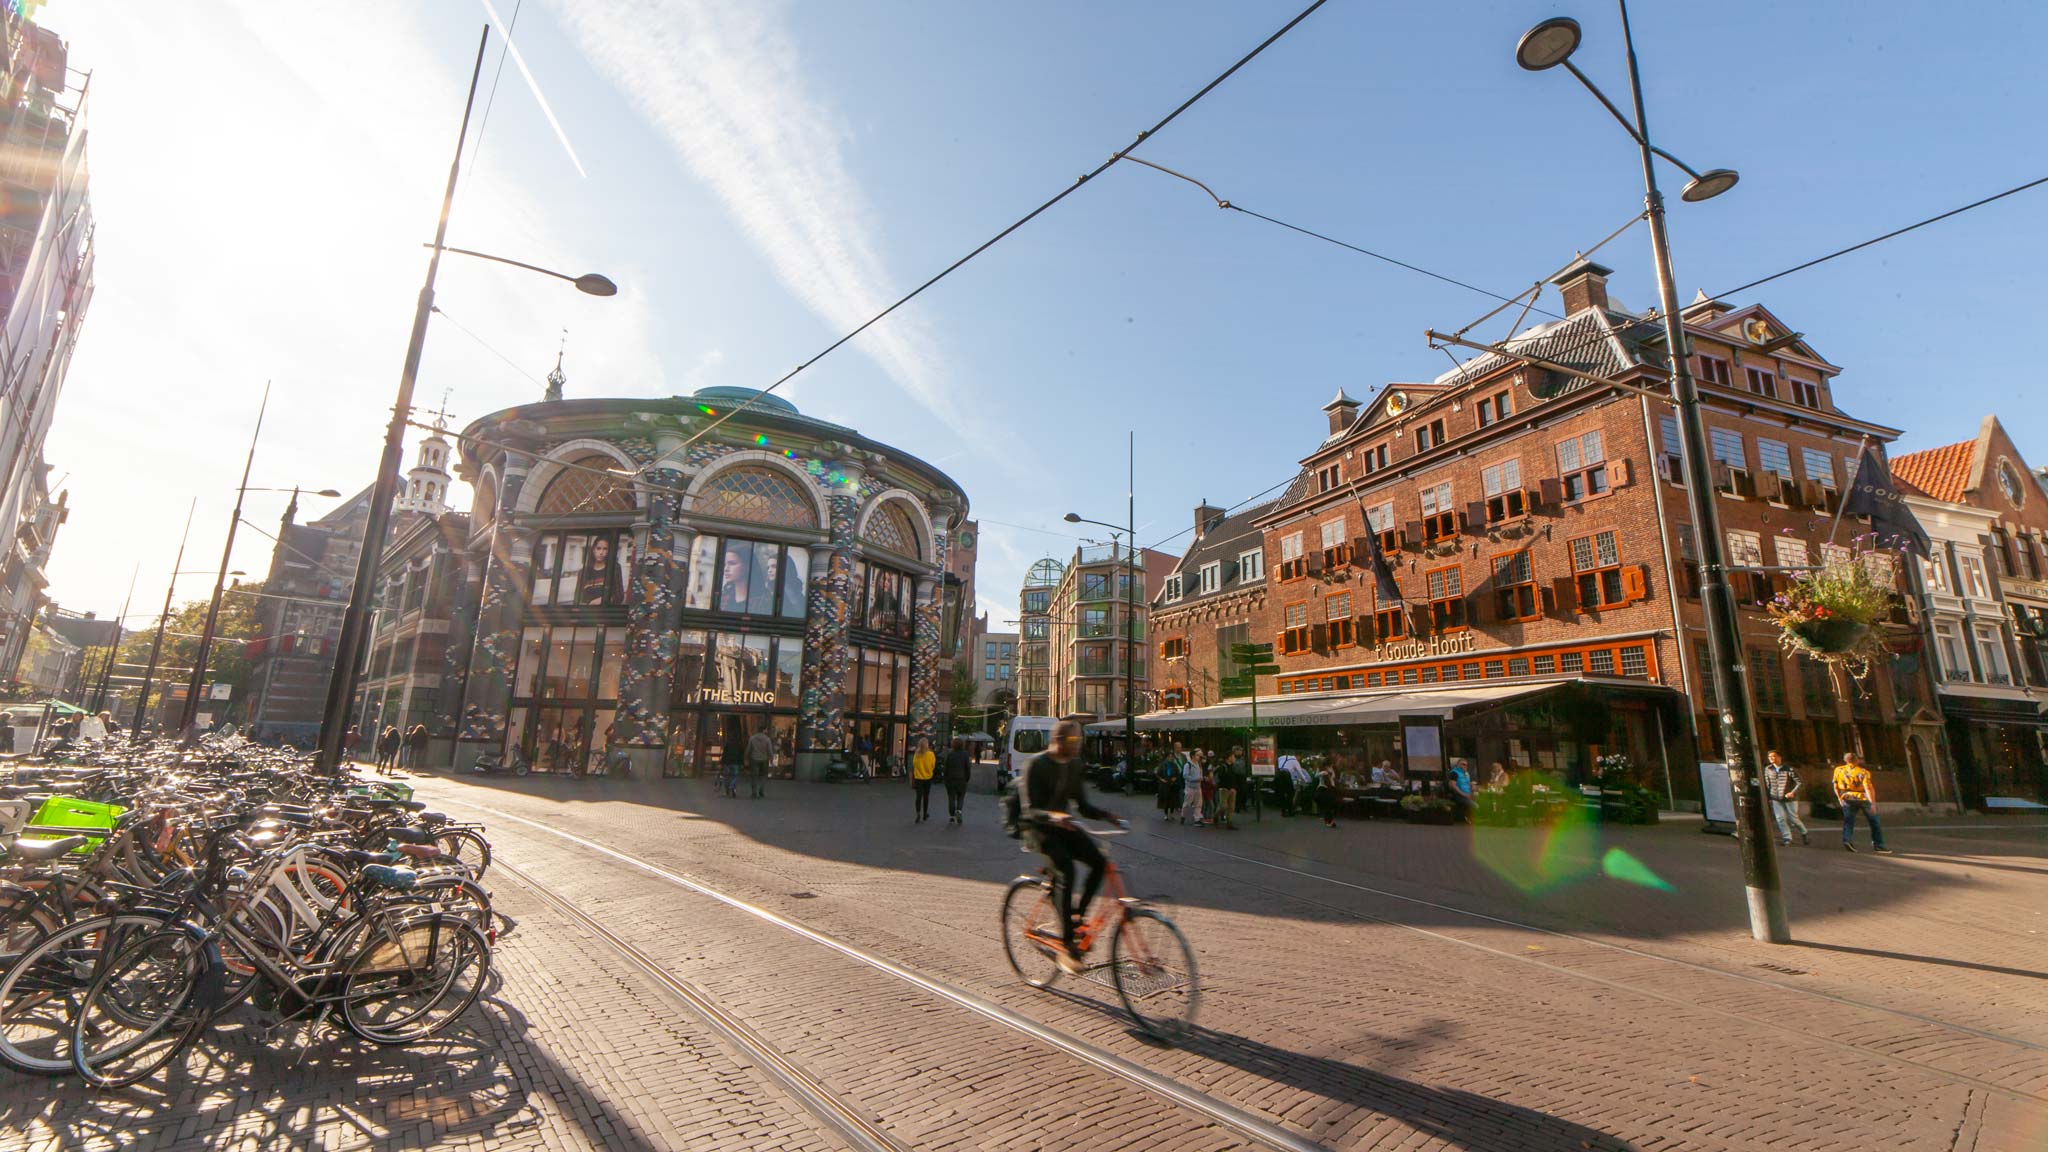 A street scene in The Hague city centre